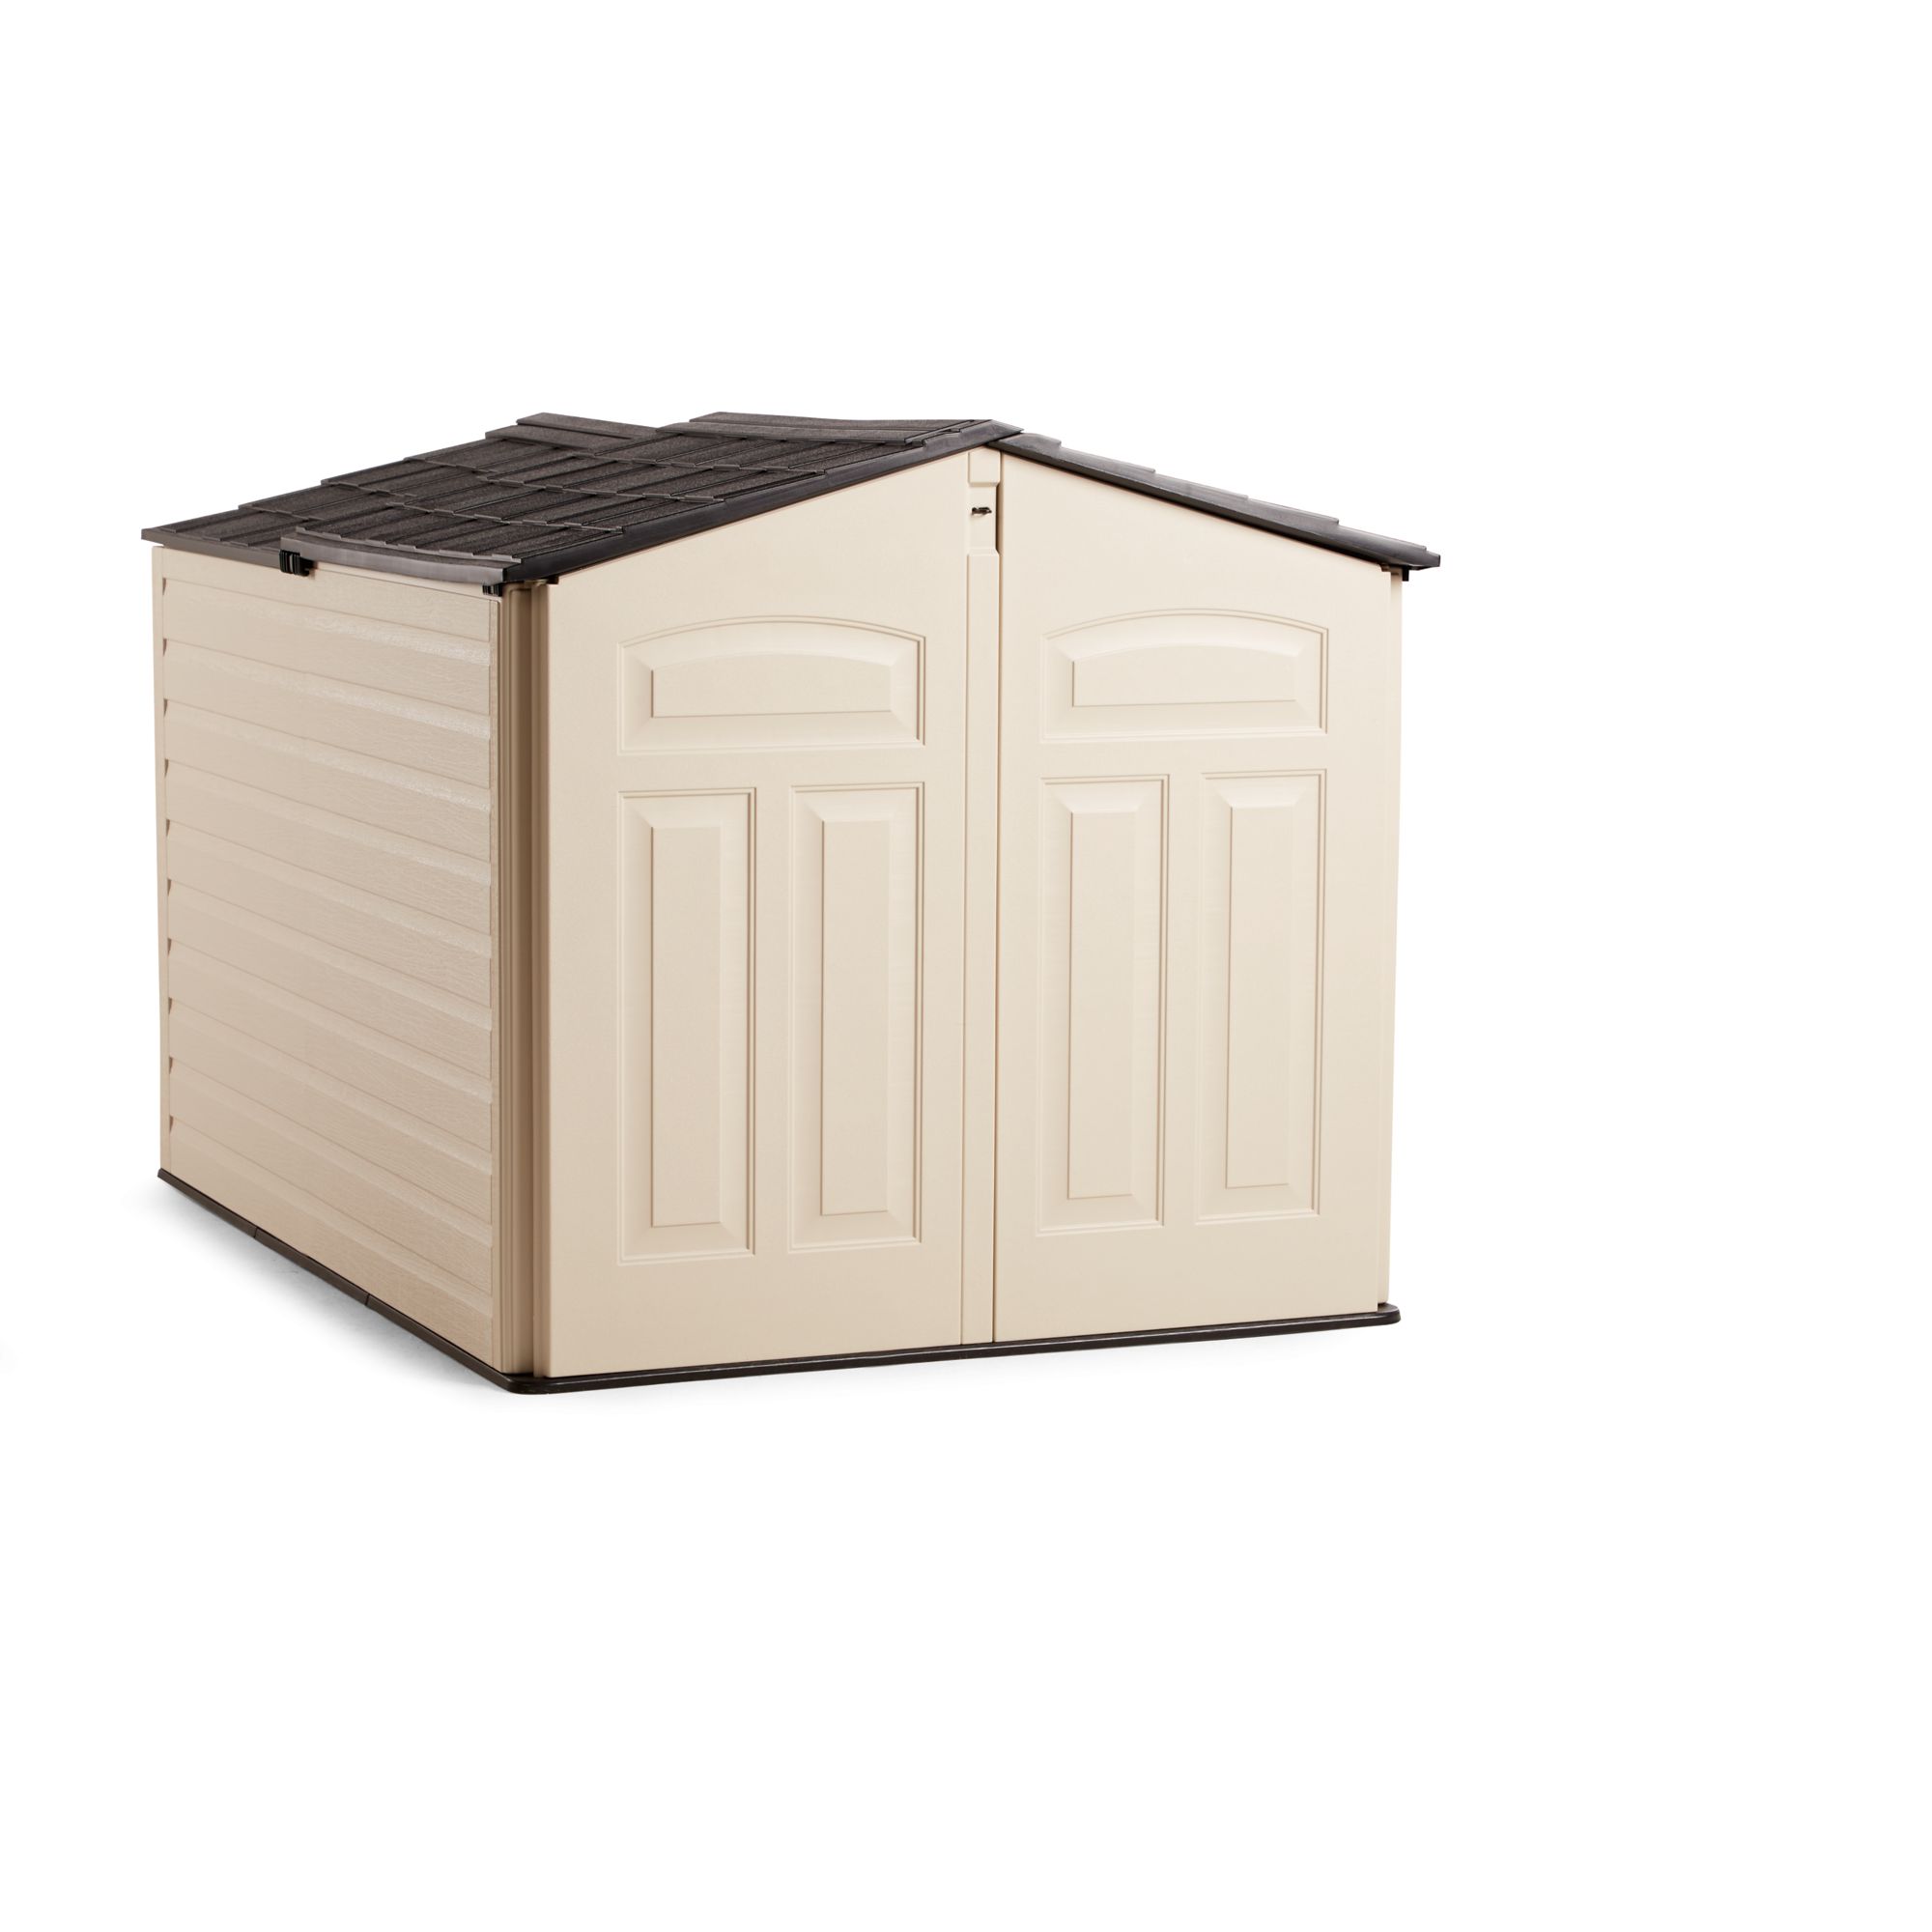 Rubbermaid Home Products Rubbermaid Sheds and Accessories - The